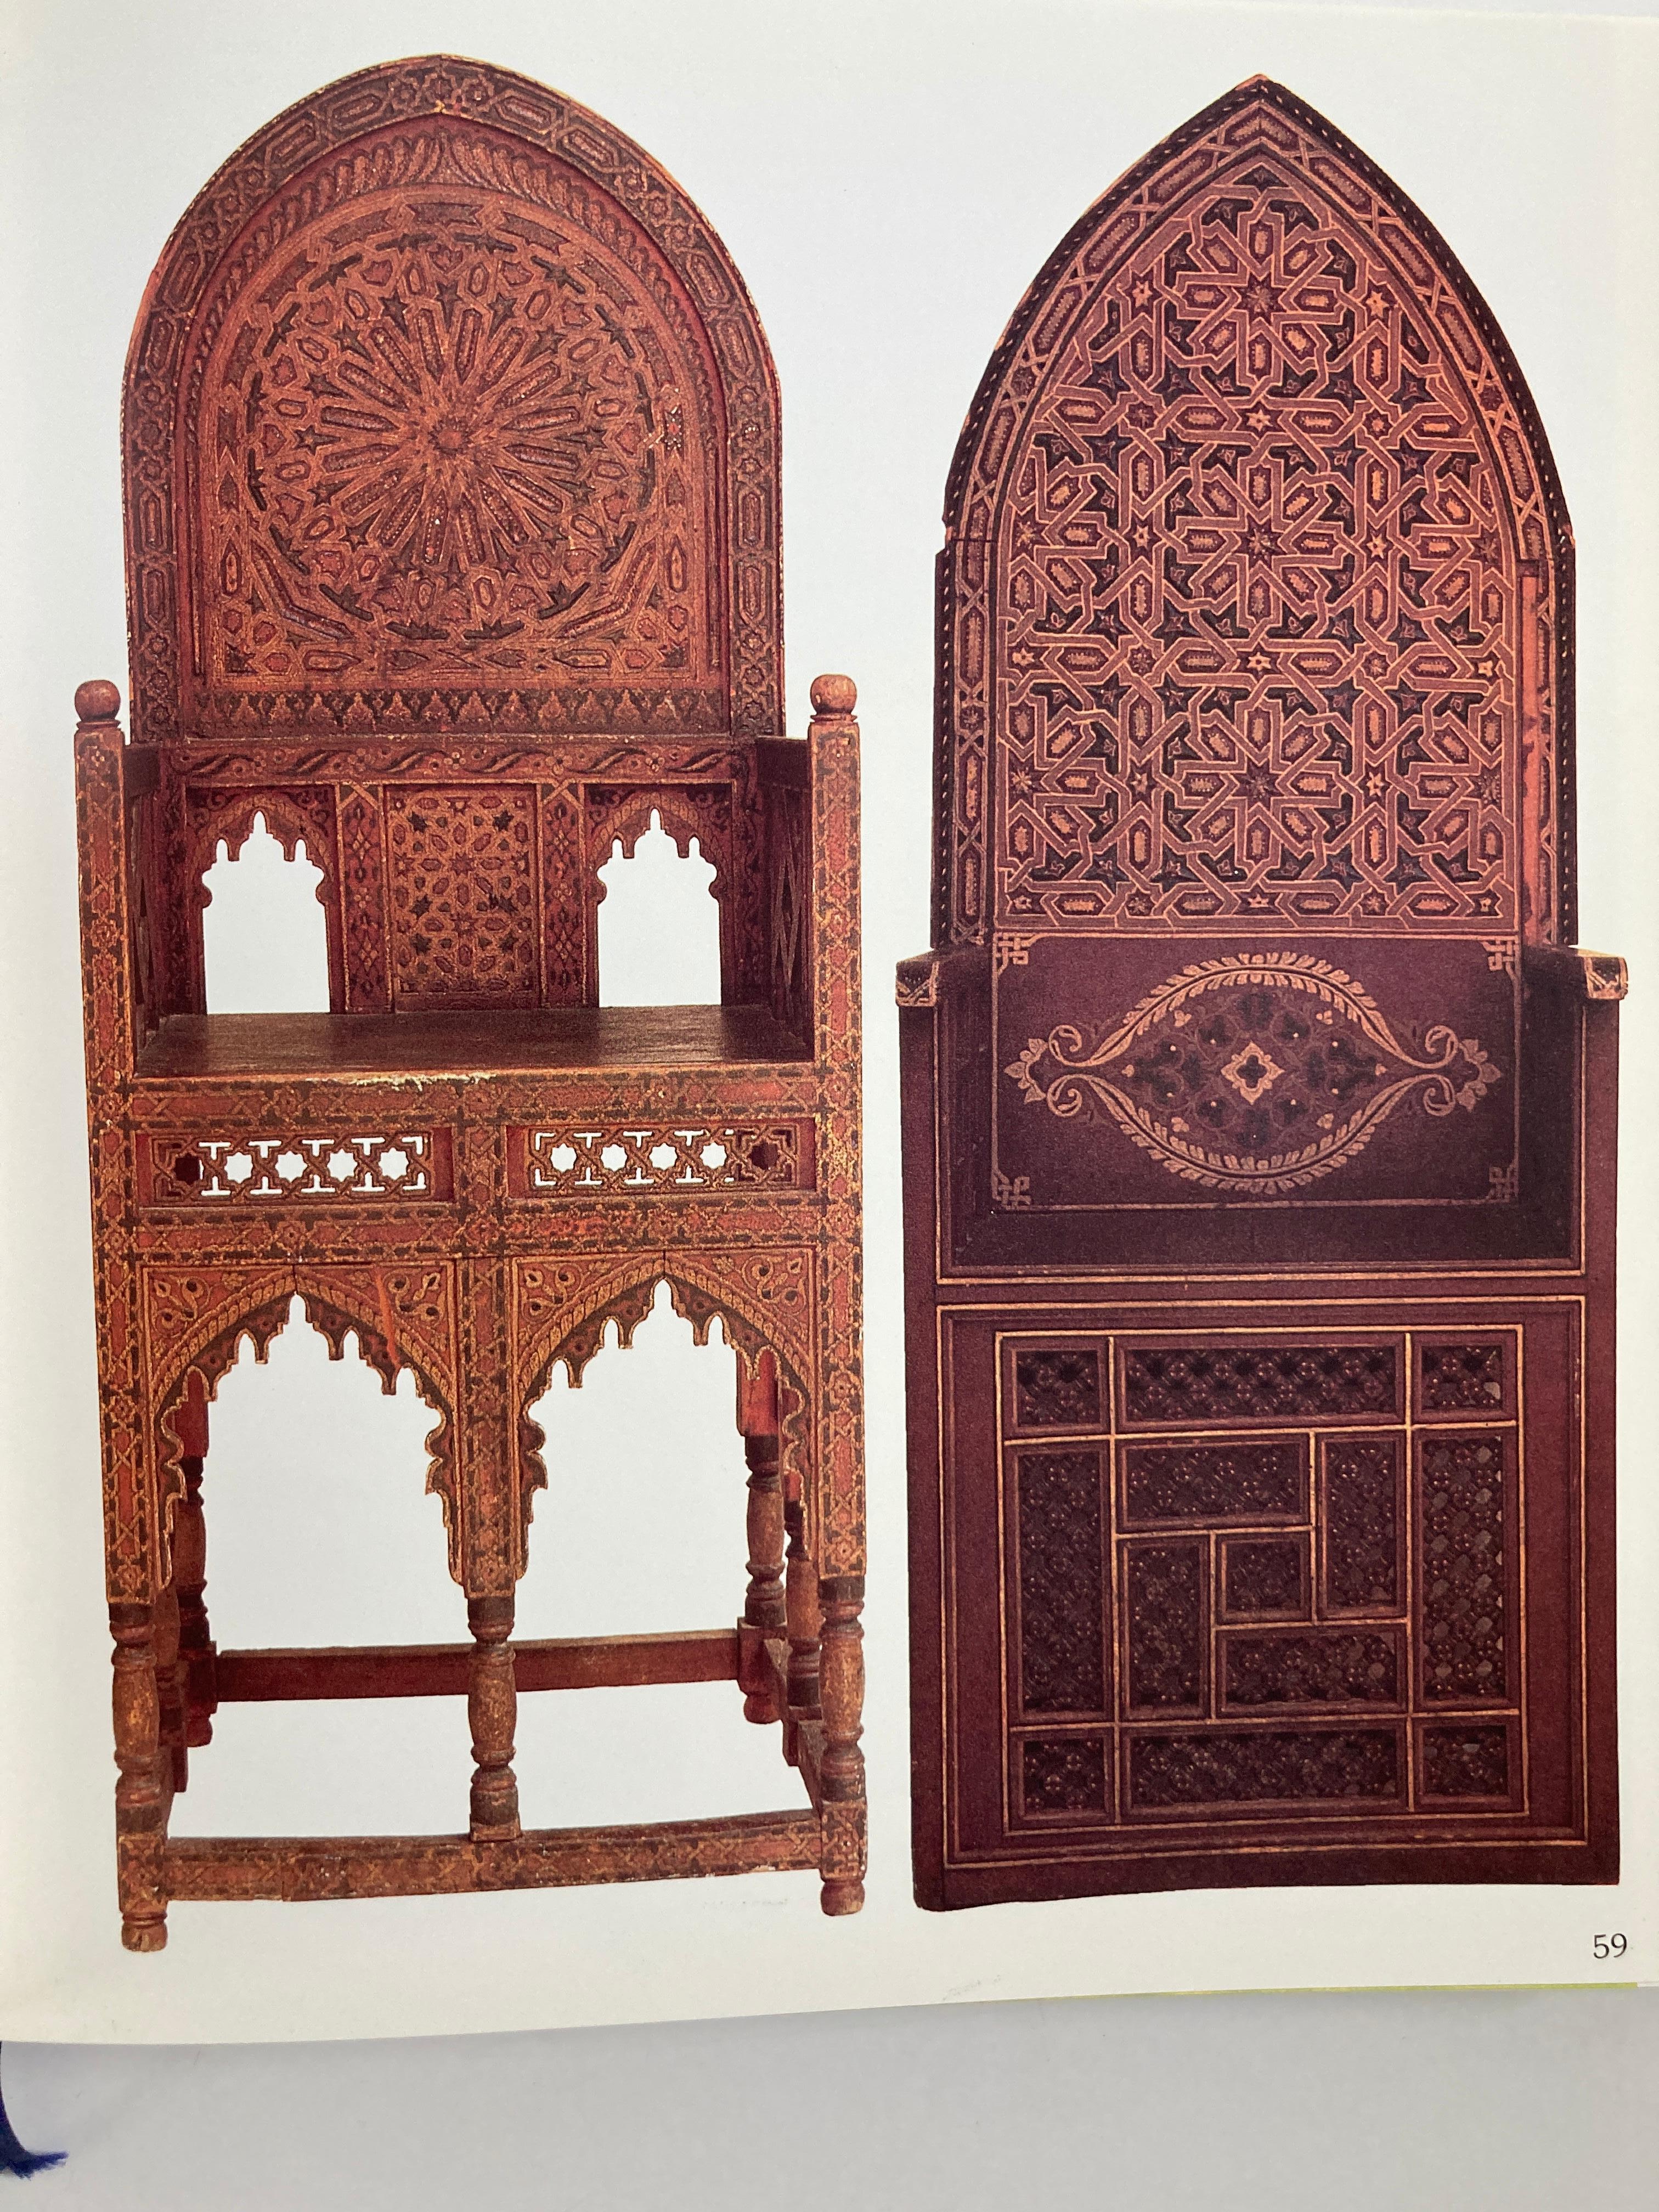 Paper Les Arts Traditionnels au Maroc by Dr. M. Sijelmassi, Hardcover Book in French For Sale